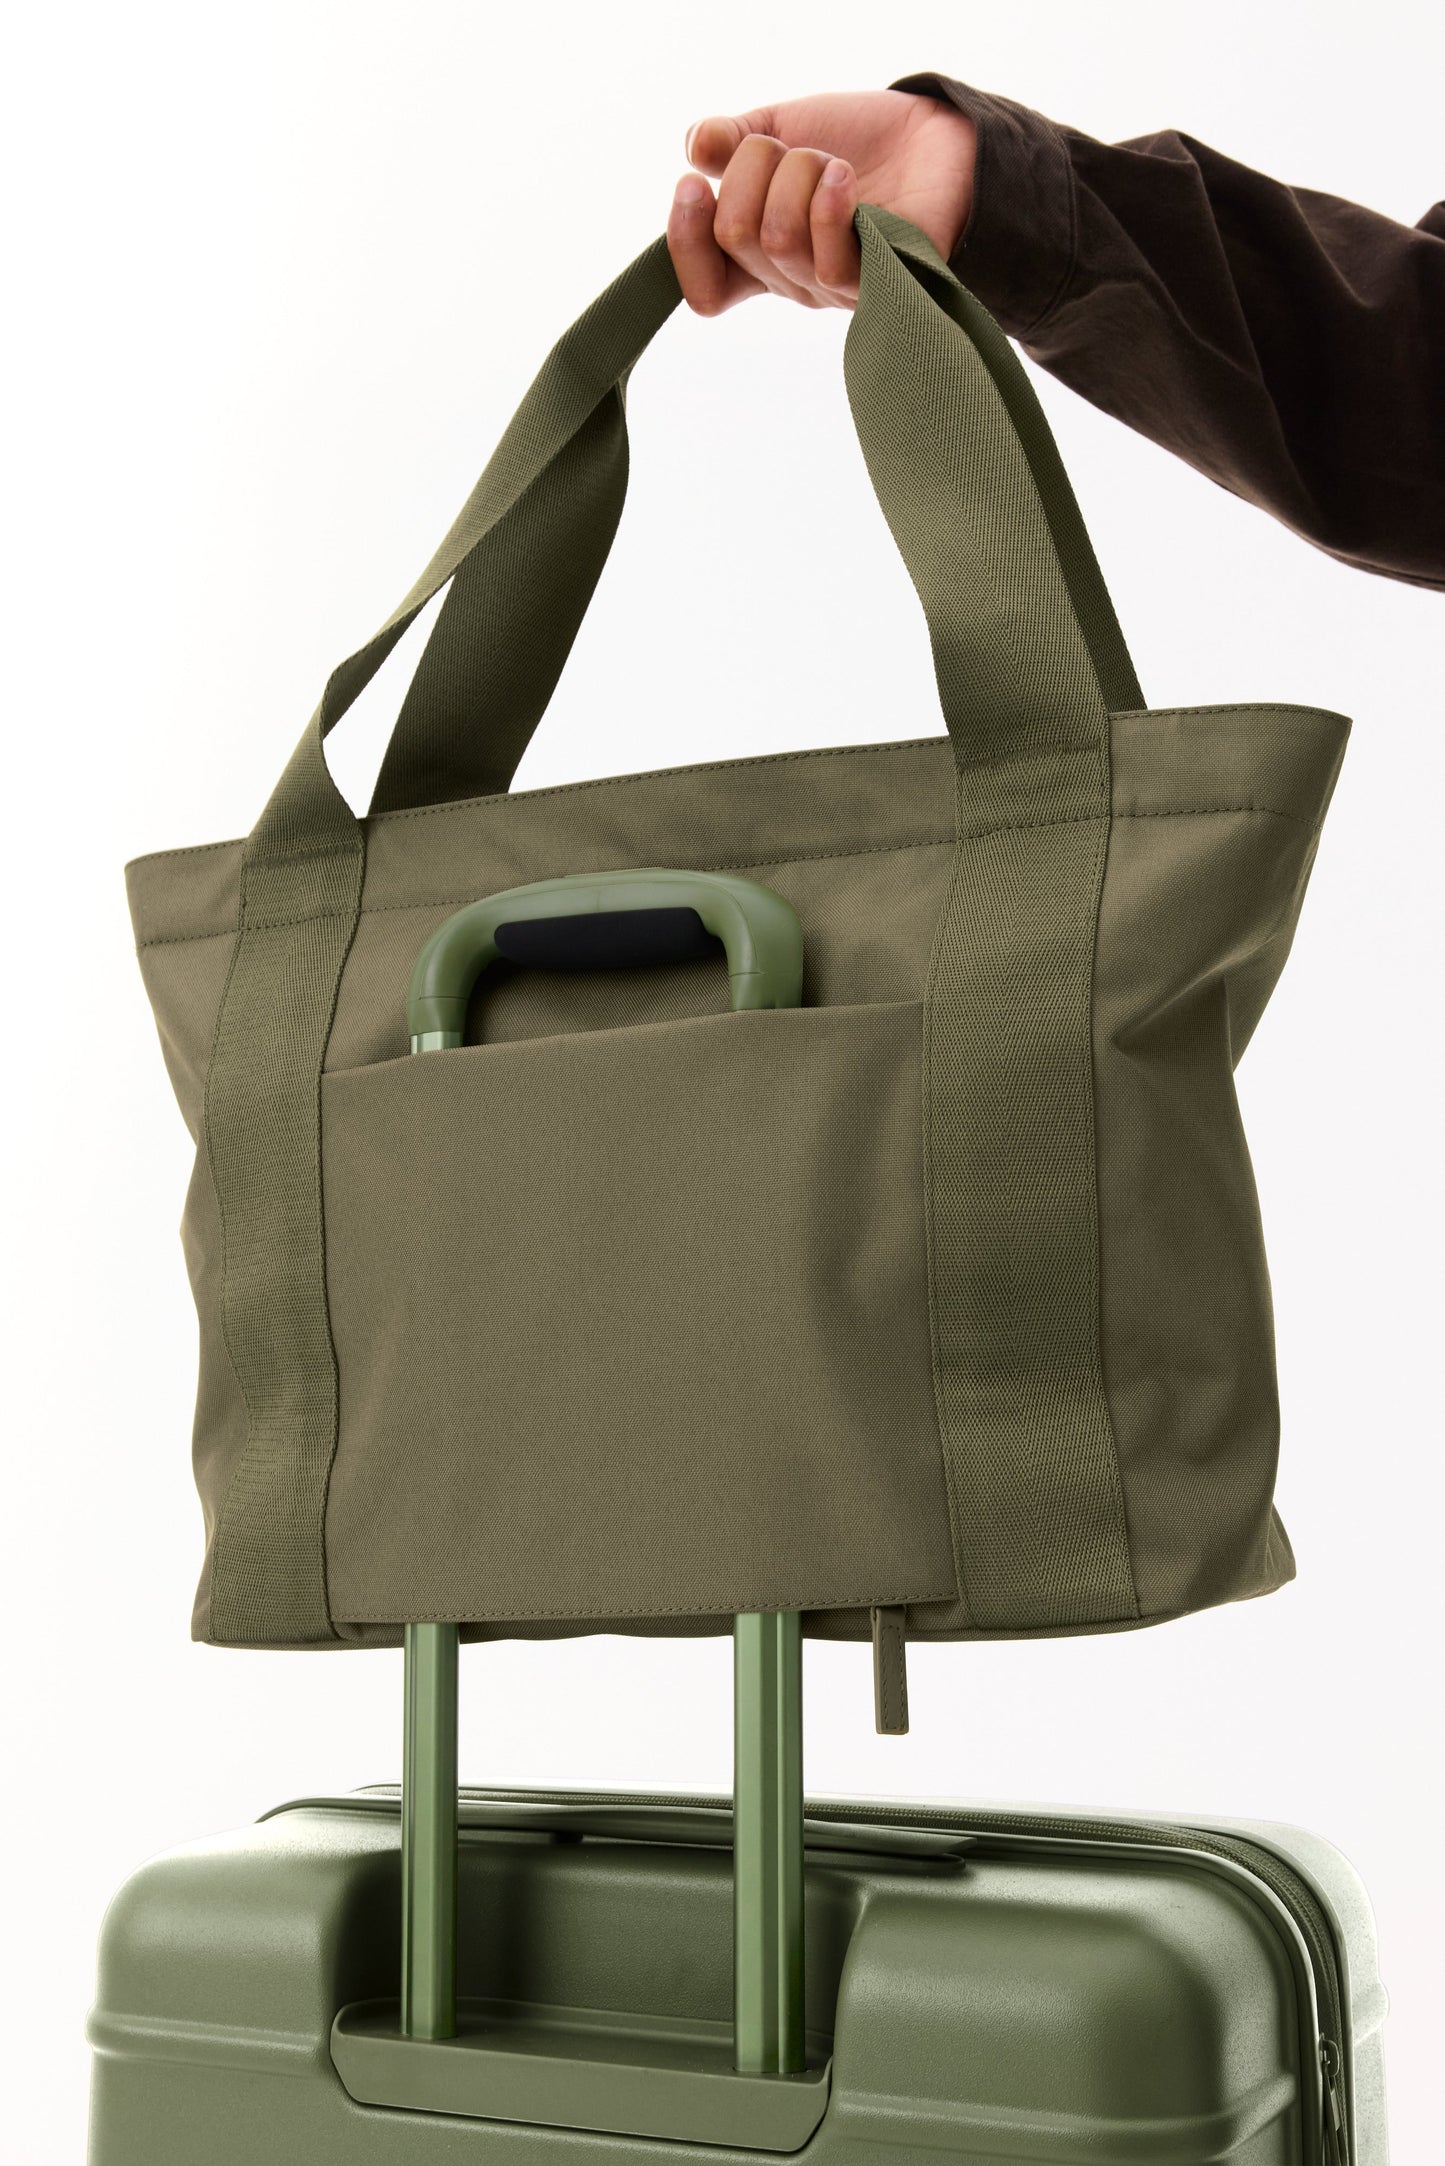 The BÉISics Tote in Olive